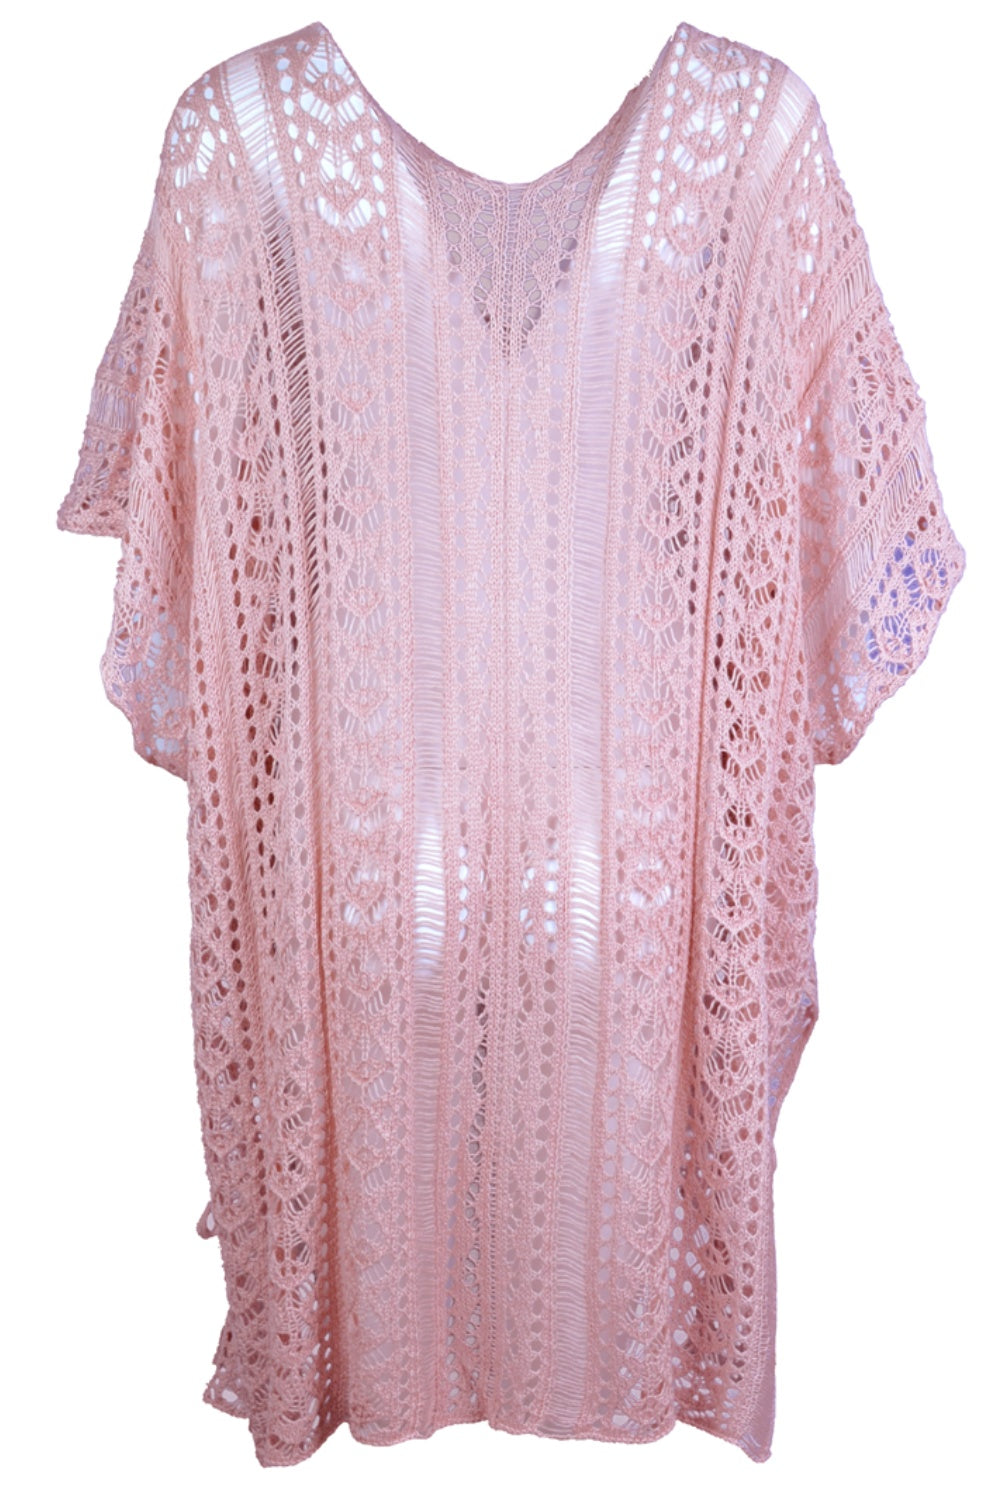 Cutout V-Neck Cover-Up with Tassel-Krush Kandy, Women's Online Fashion Boutique Located in Phoenix, Arizona (Scottsdale Area)